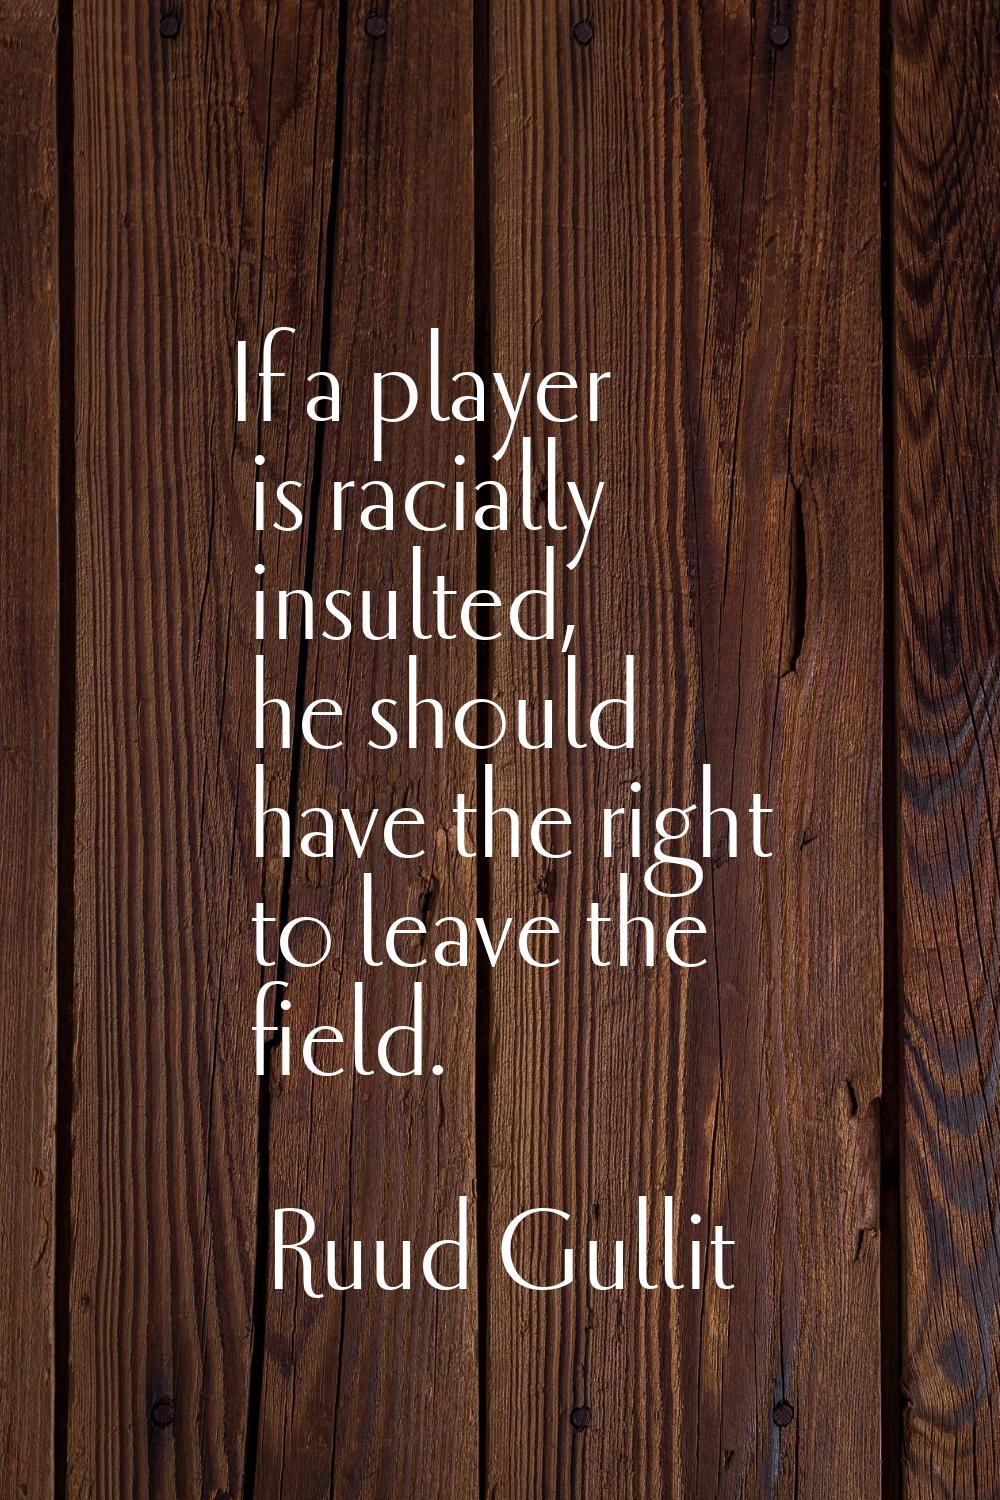 If a player is racially insulted, he should have the right to leave the field.